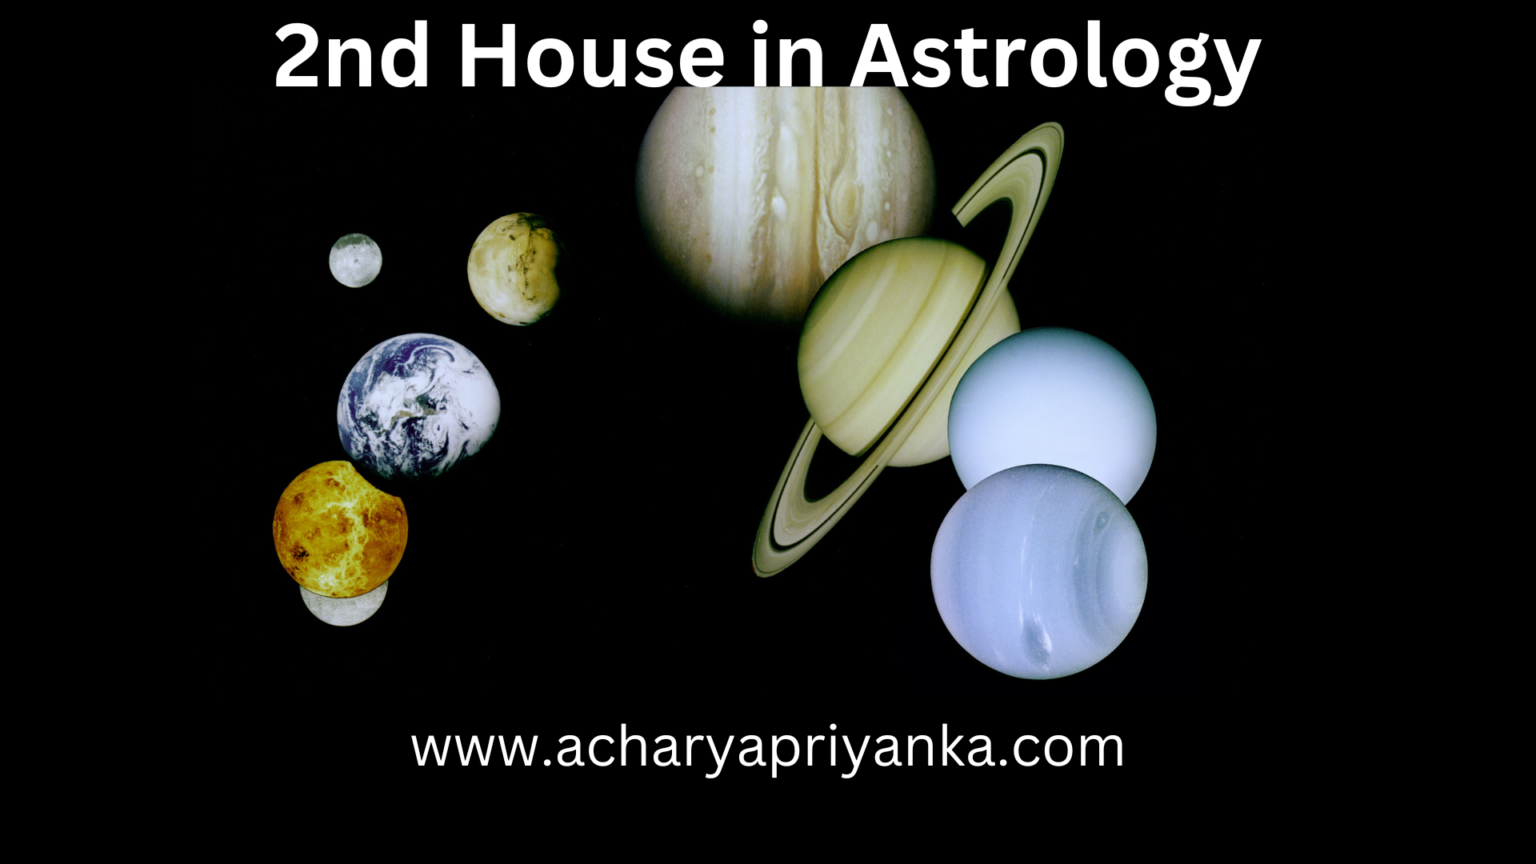 the second house in astrology